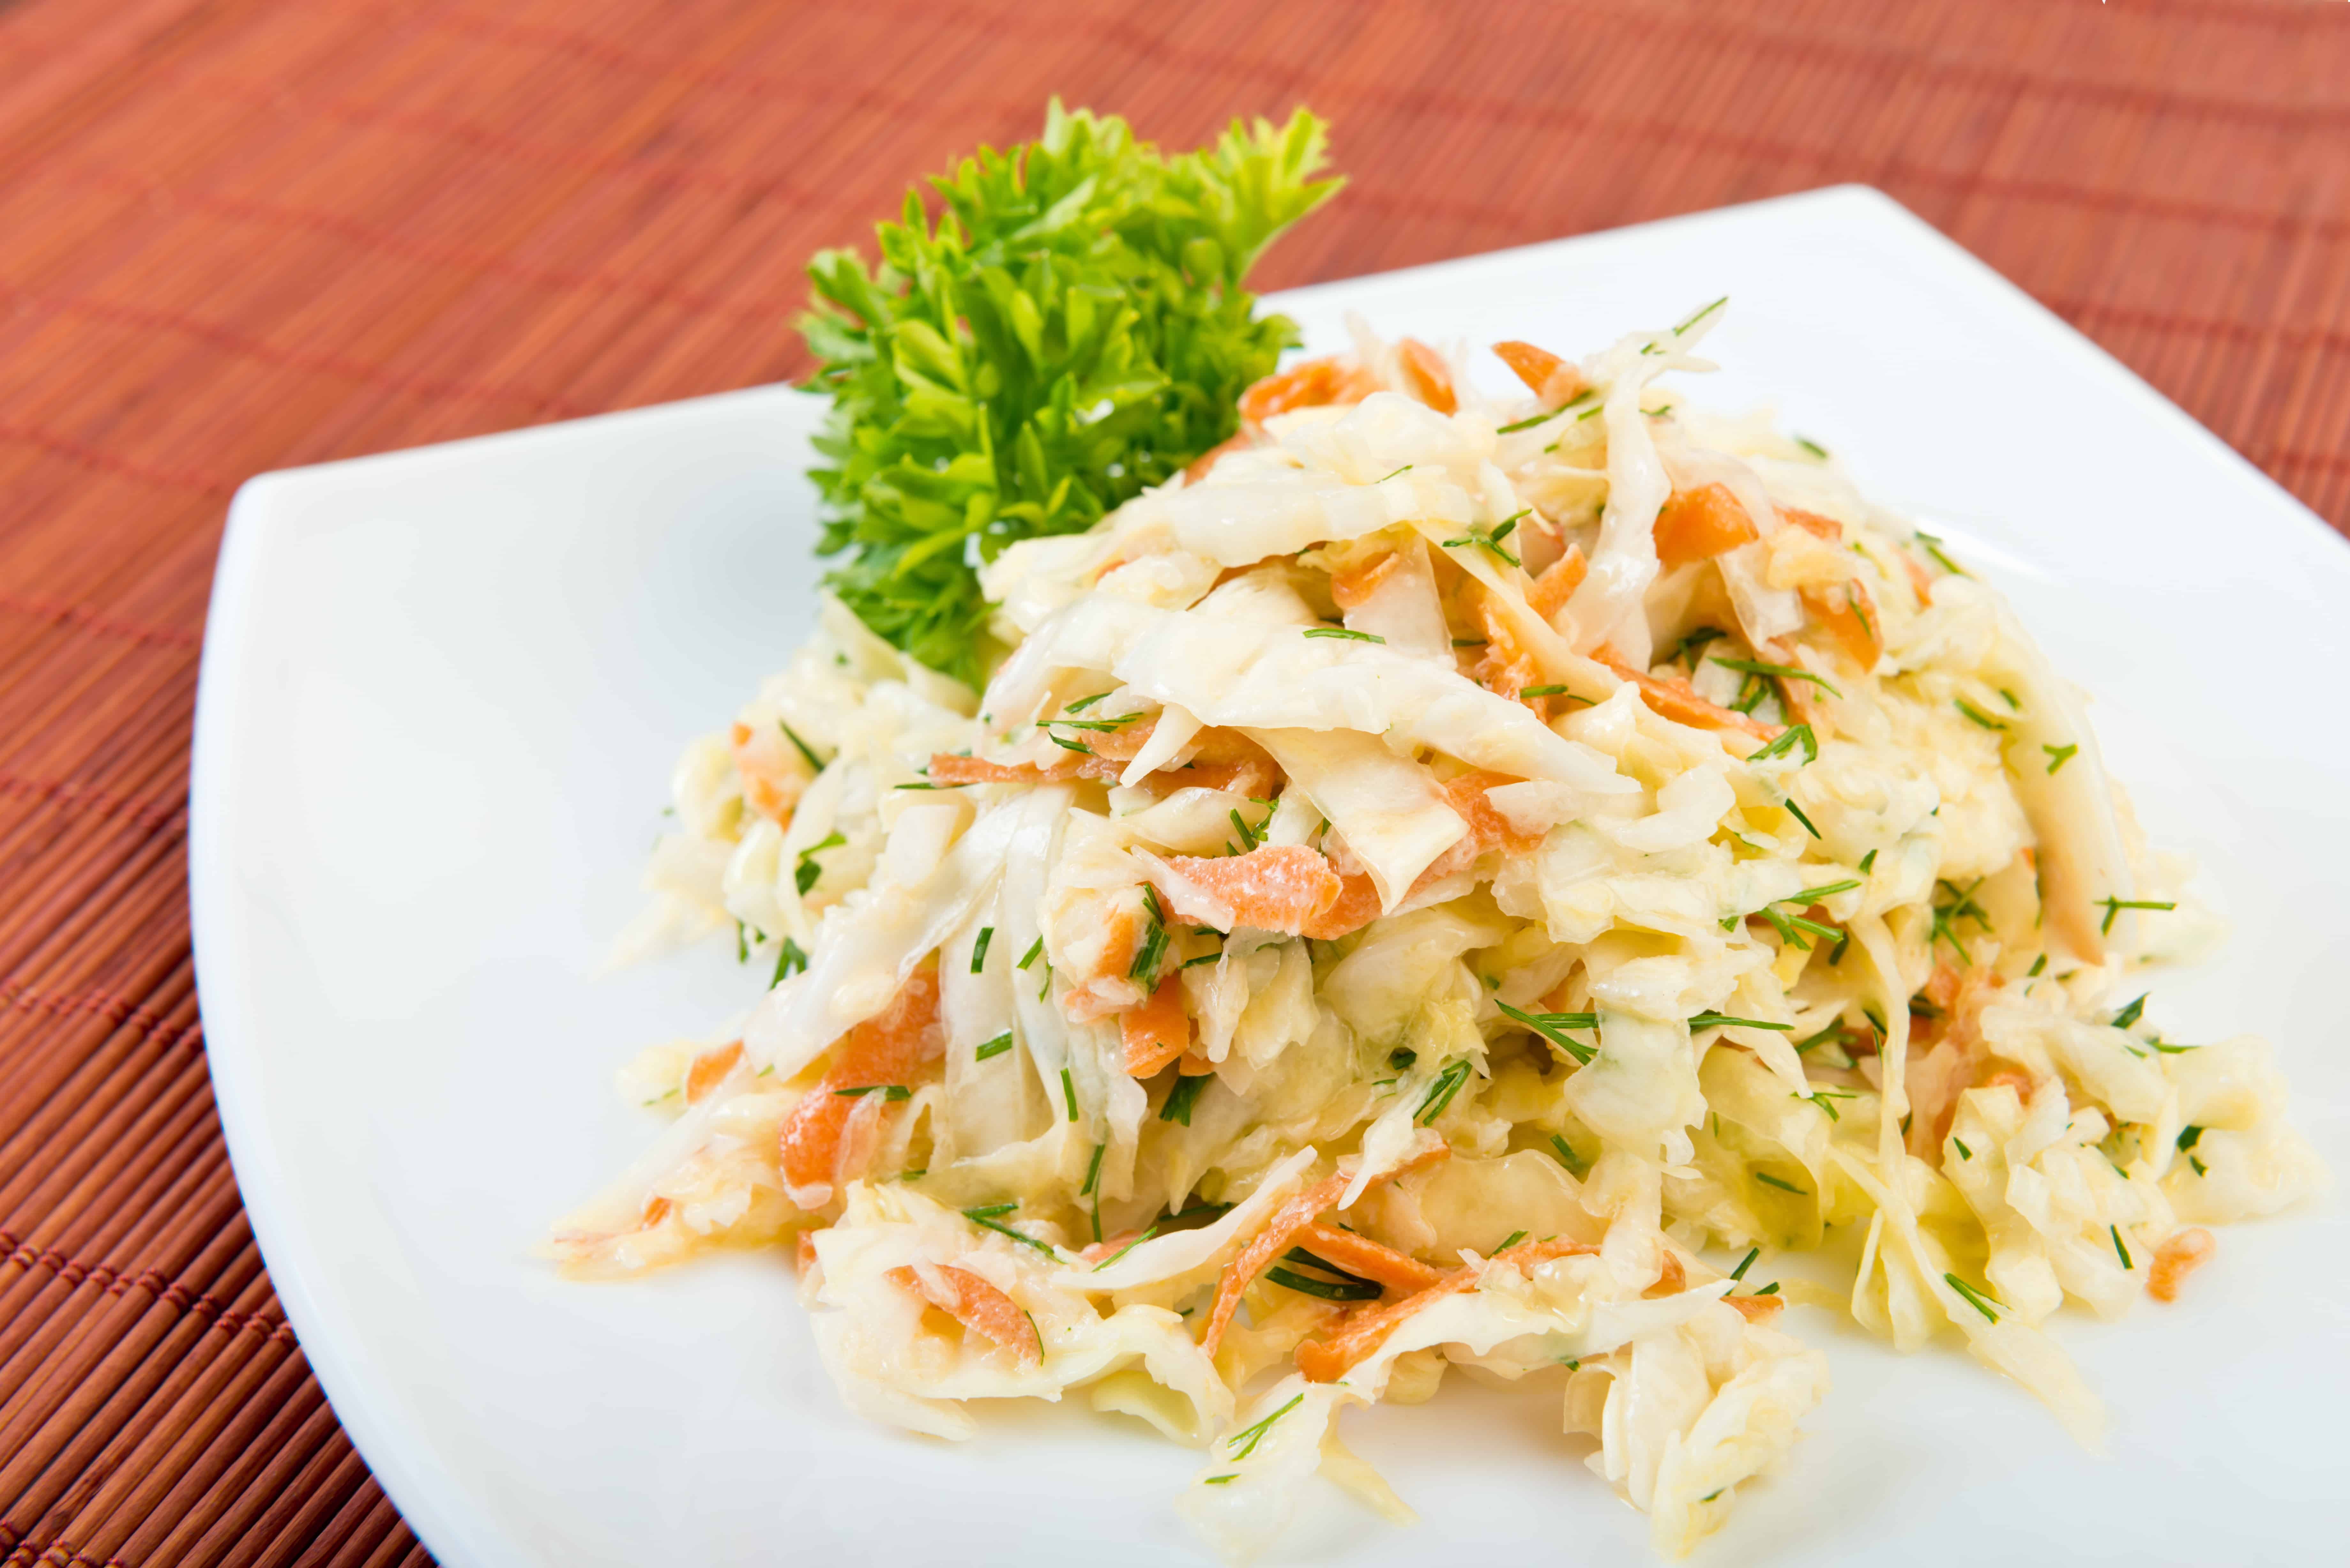 Low fat vegetable salad coleslaw (cabbage, carrot, dill,  mayonnaise) on plate at restaurant table